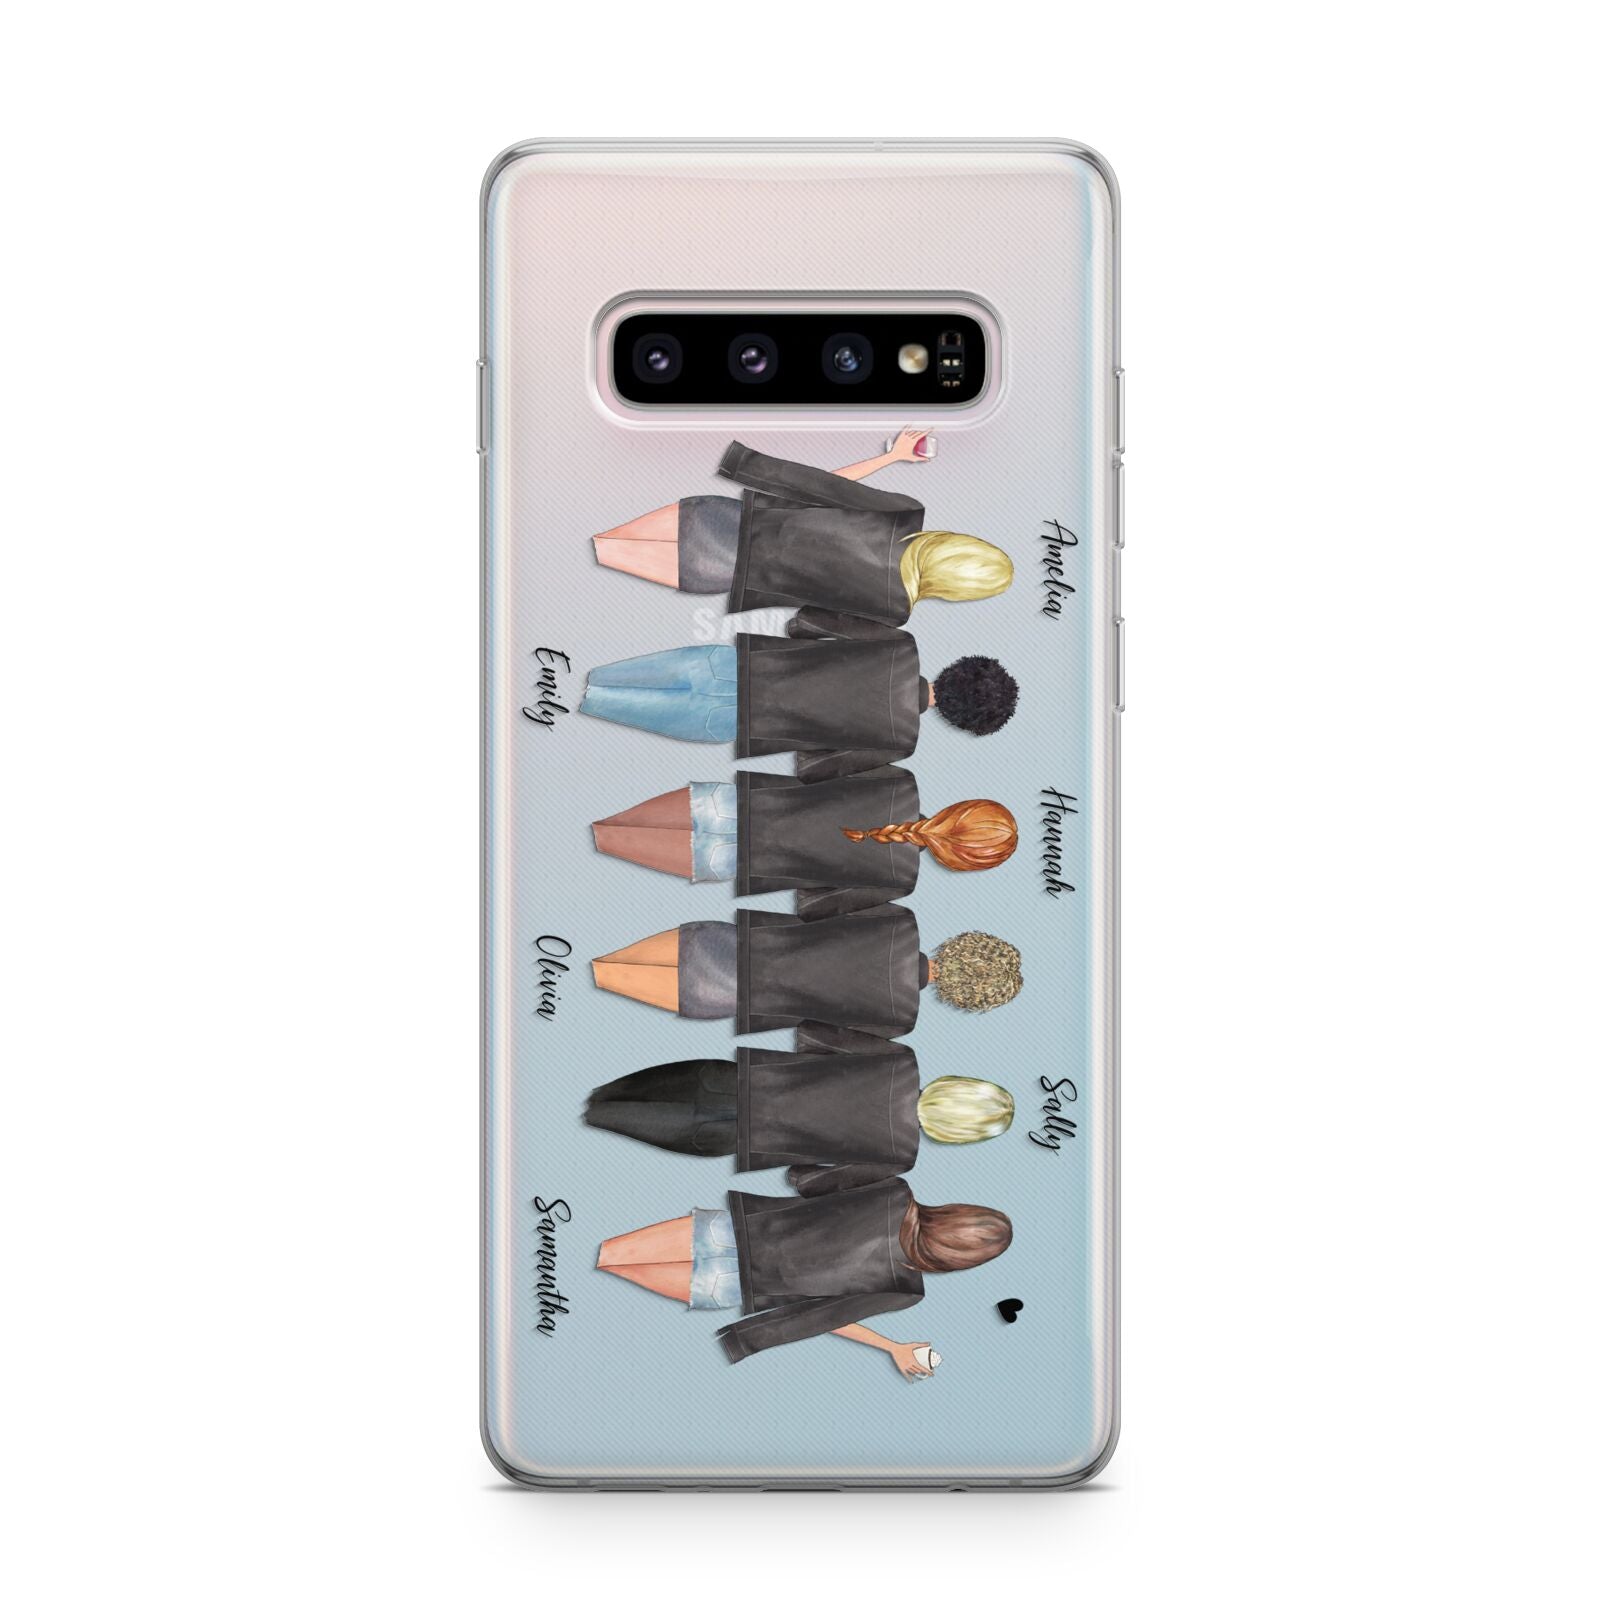 6 Best Friends with Names Samsung Galaxy S10 Plus Case